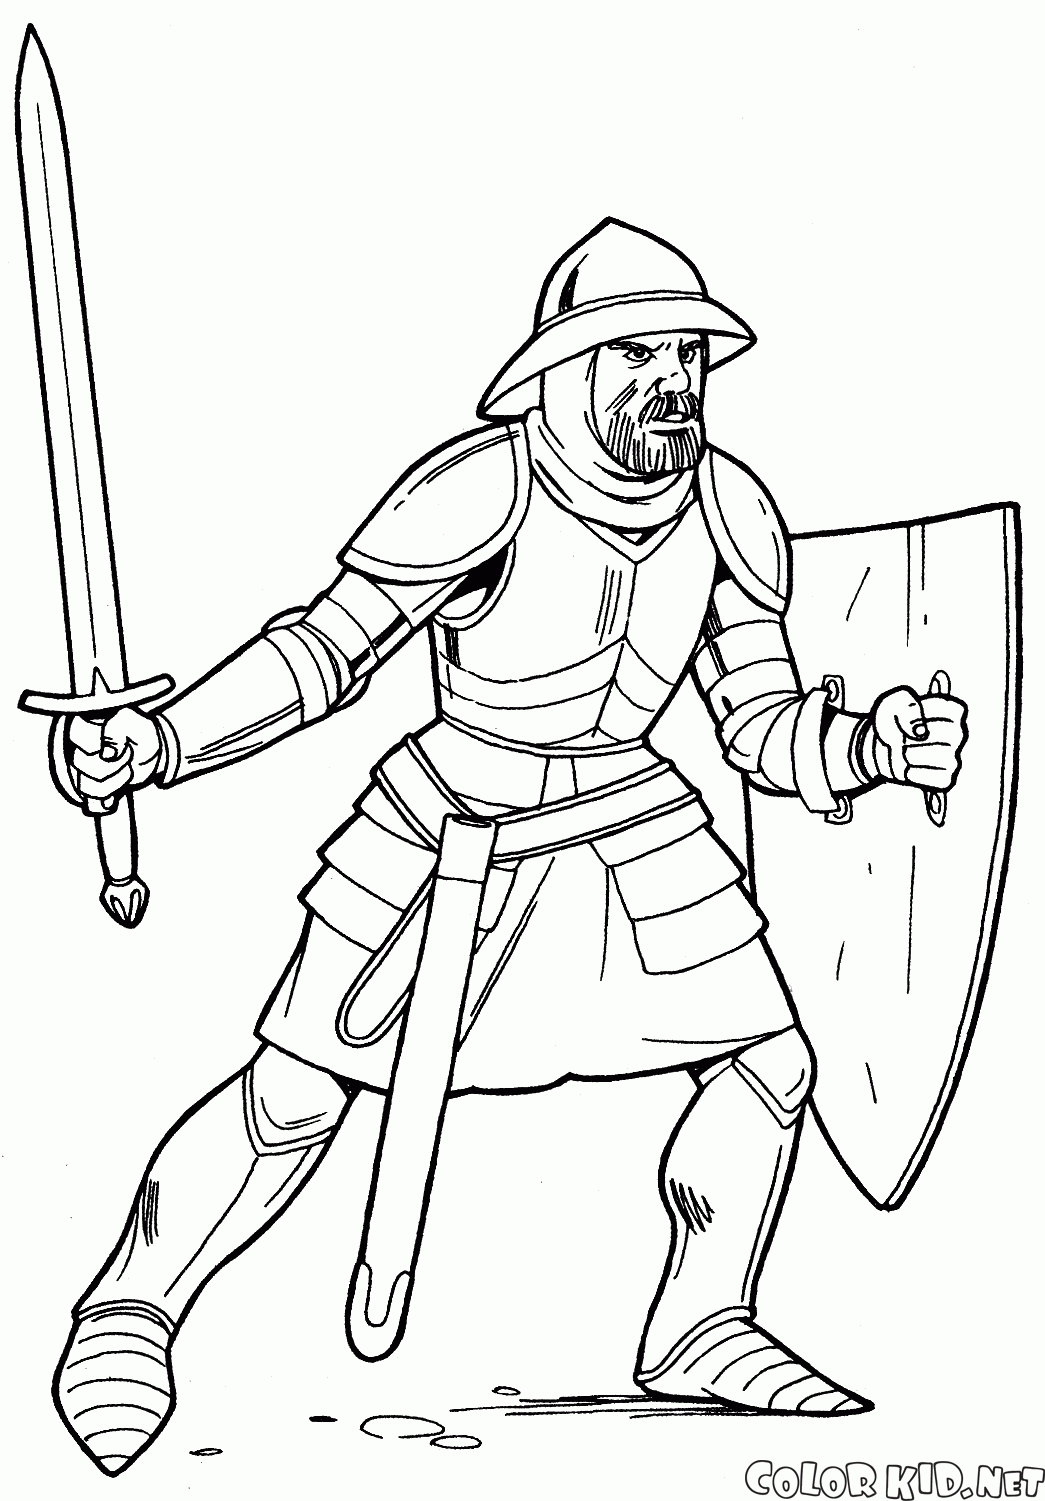 Coloring page - Knight in light armor